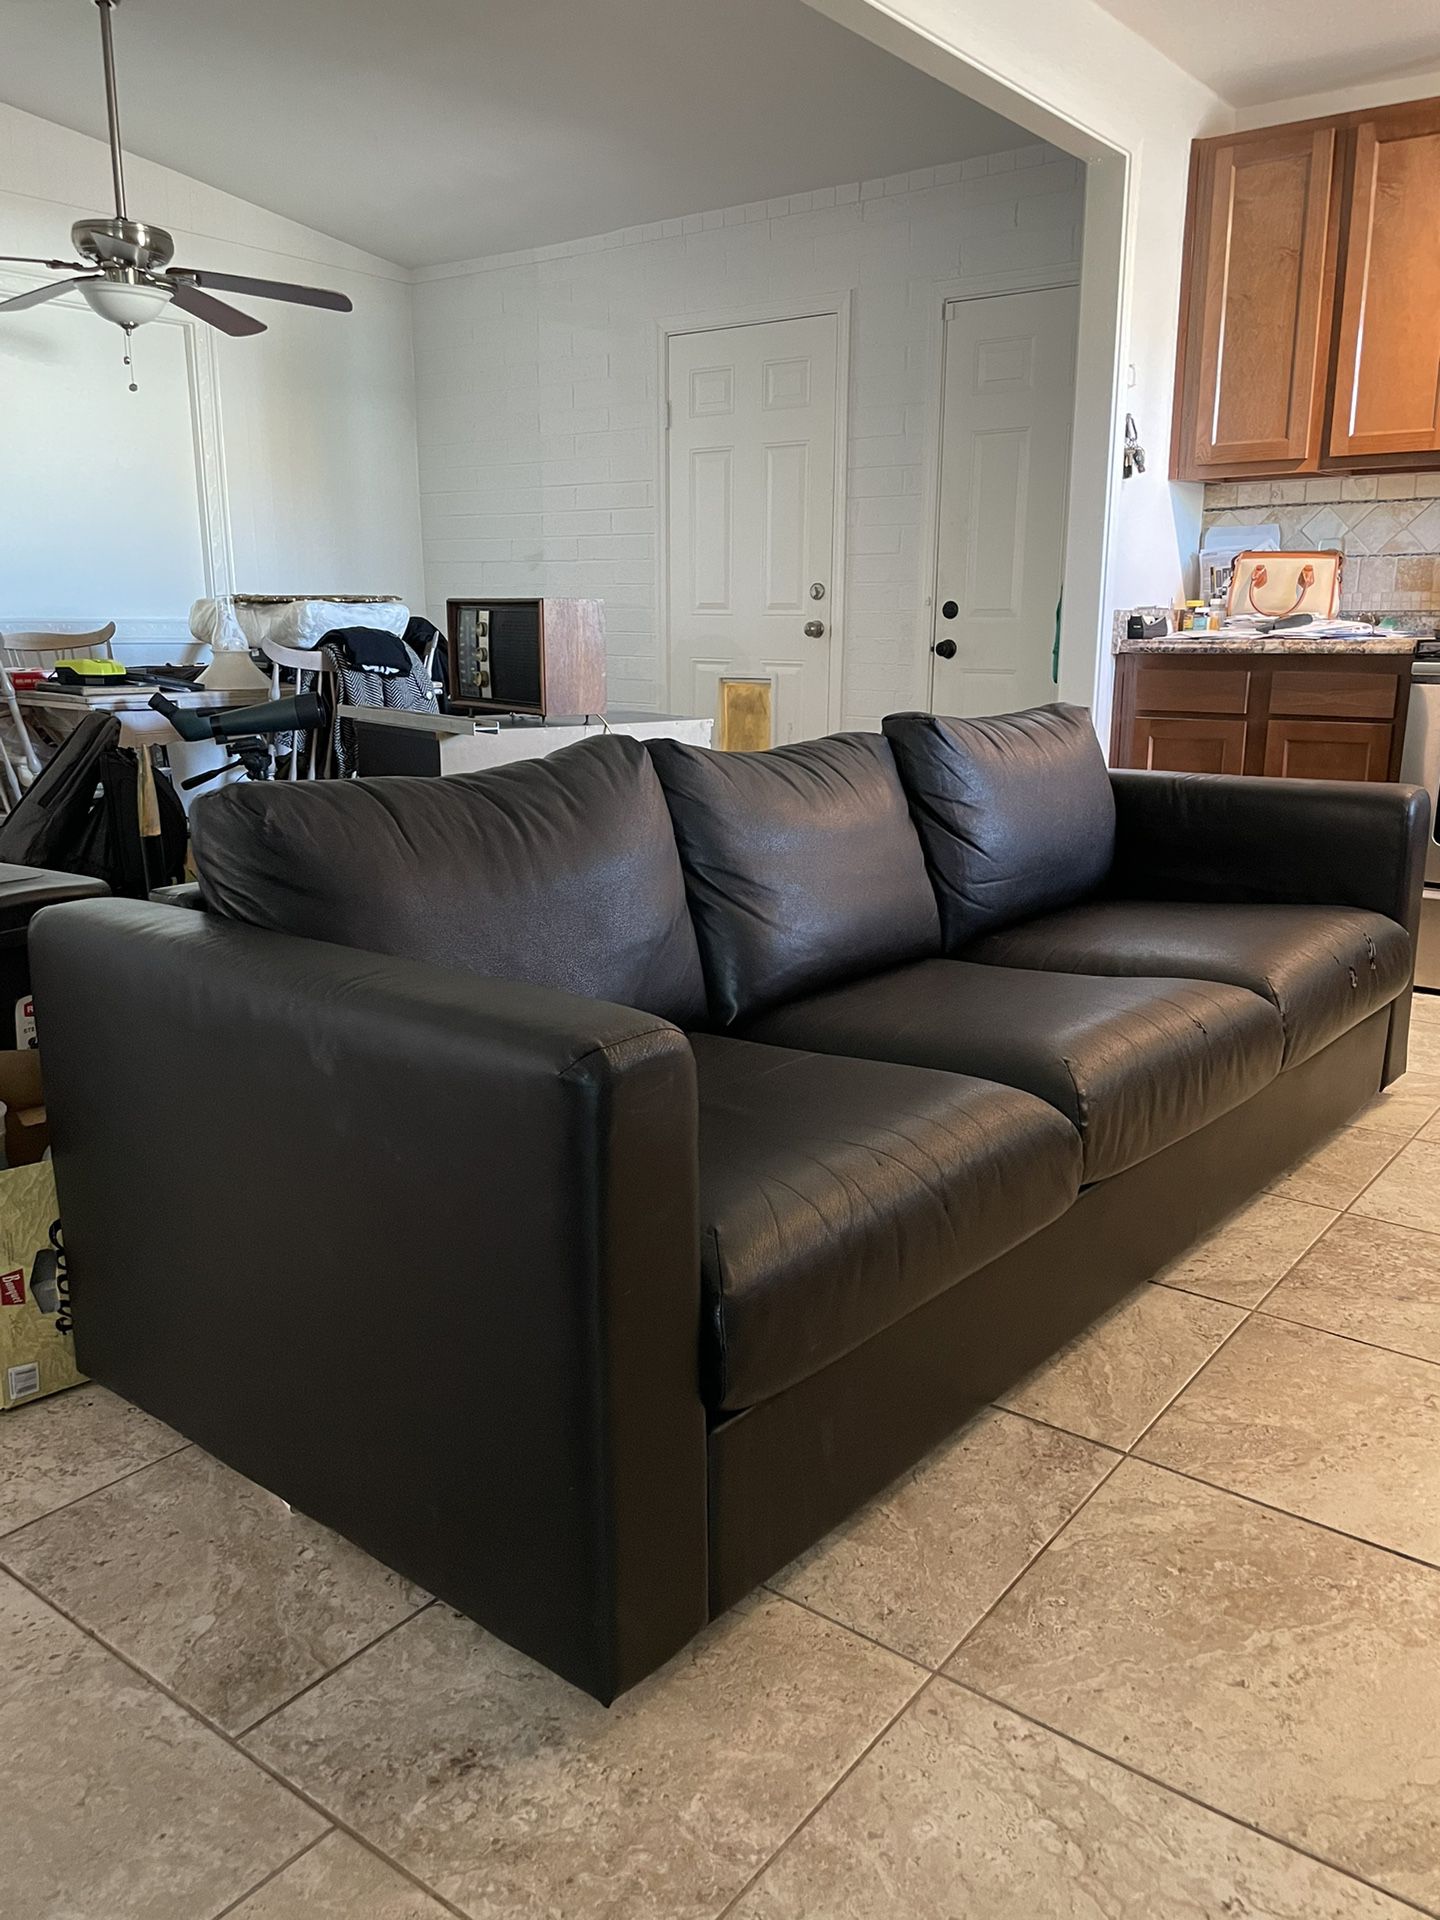 Black IKEA Couch